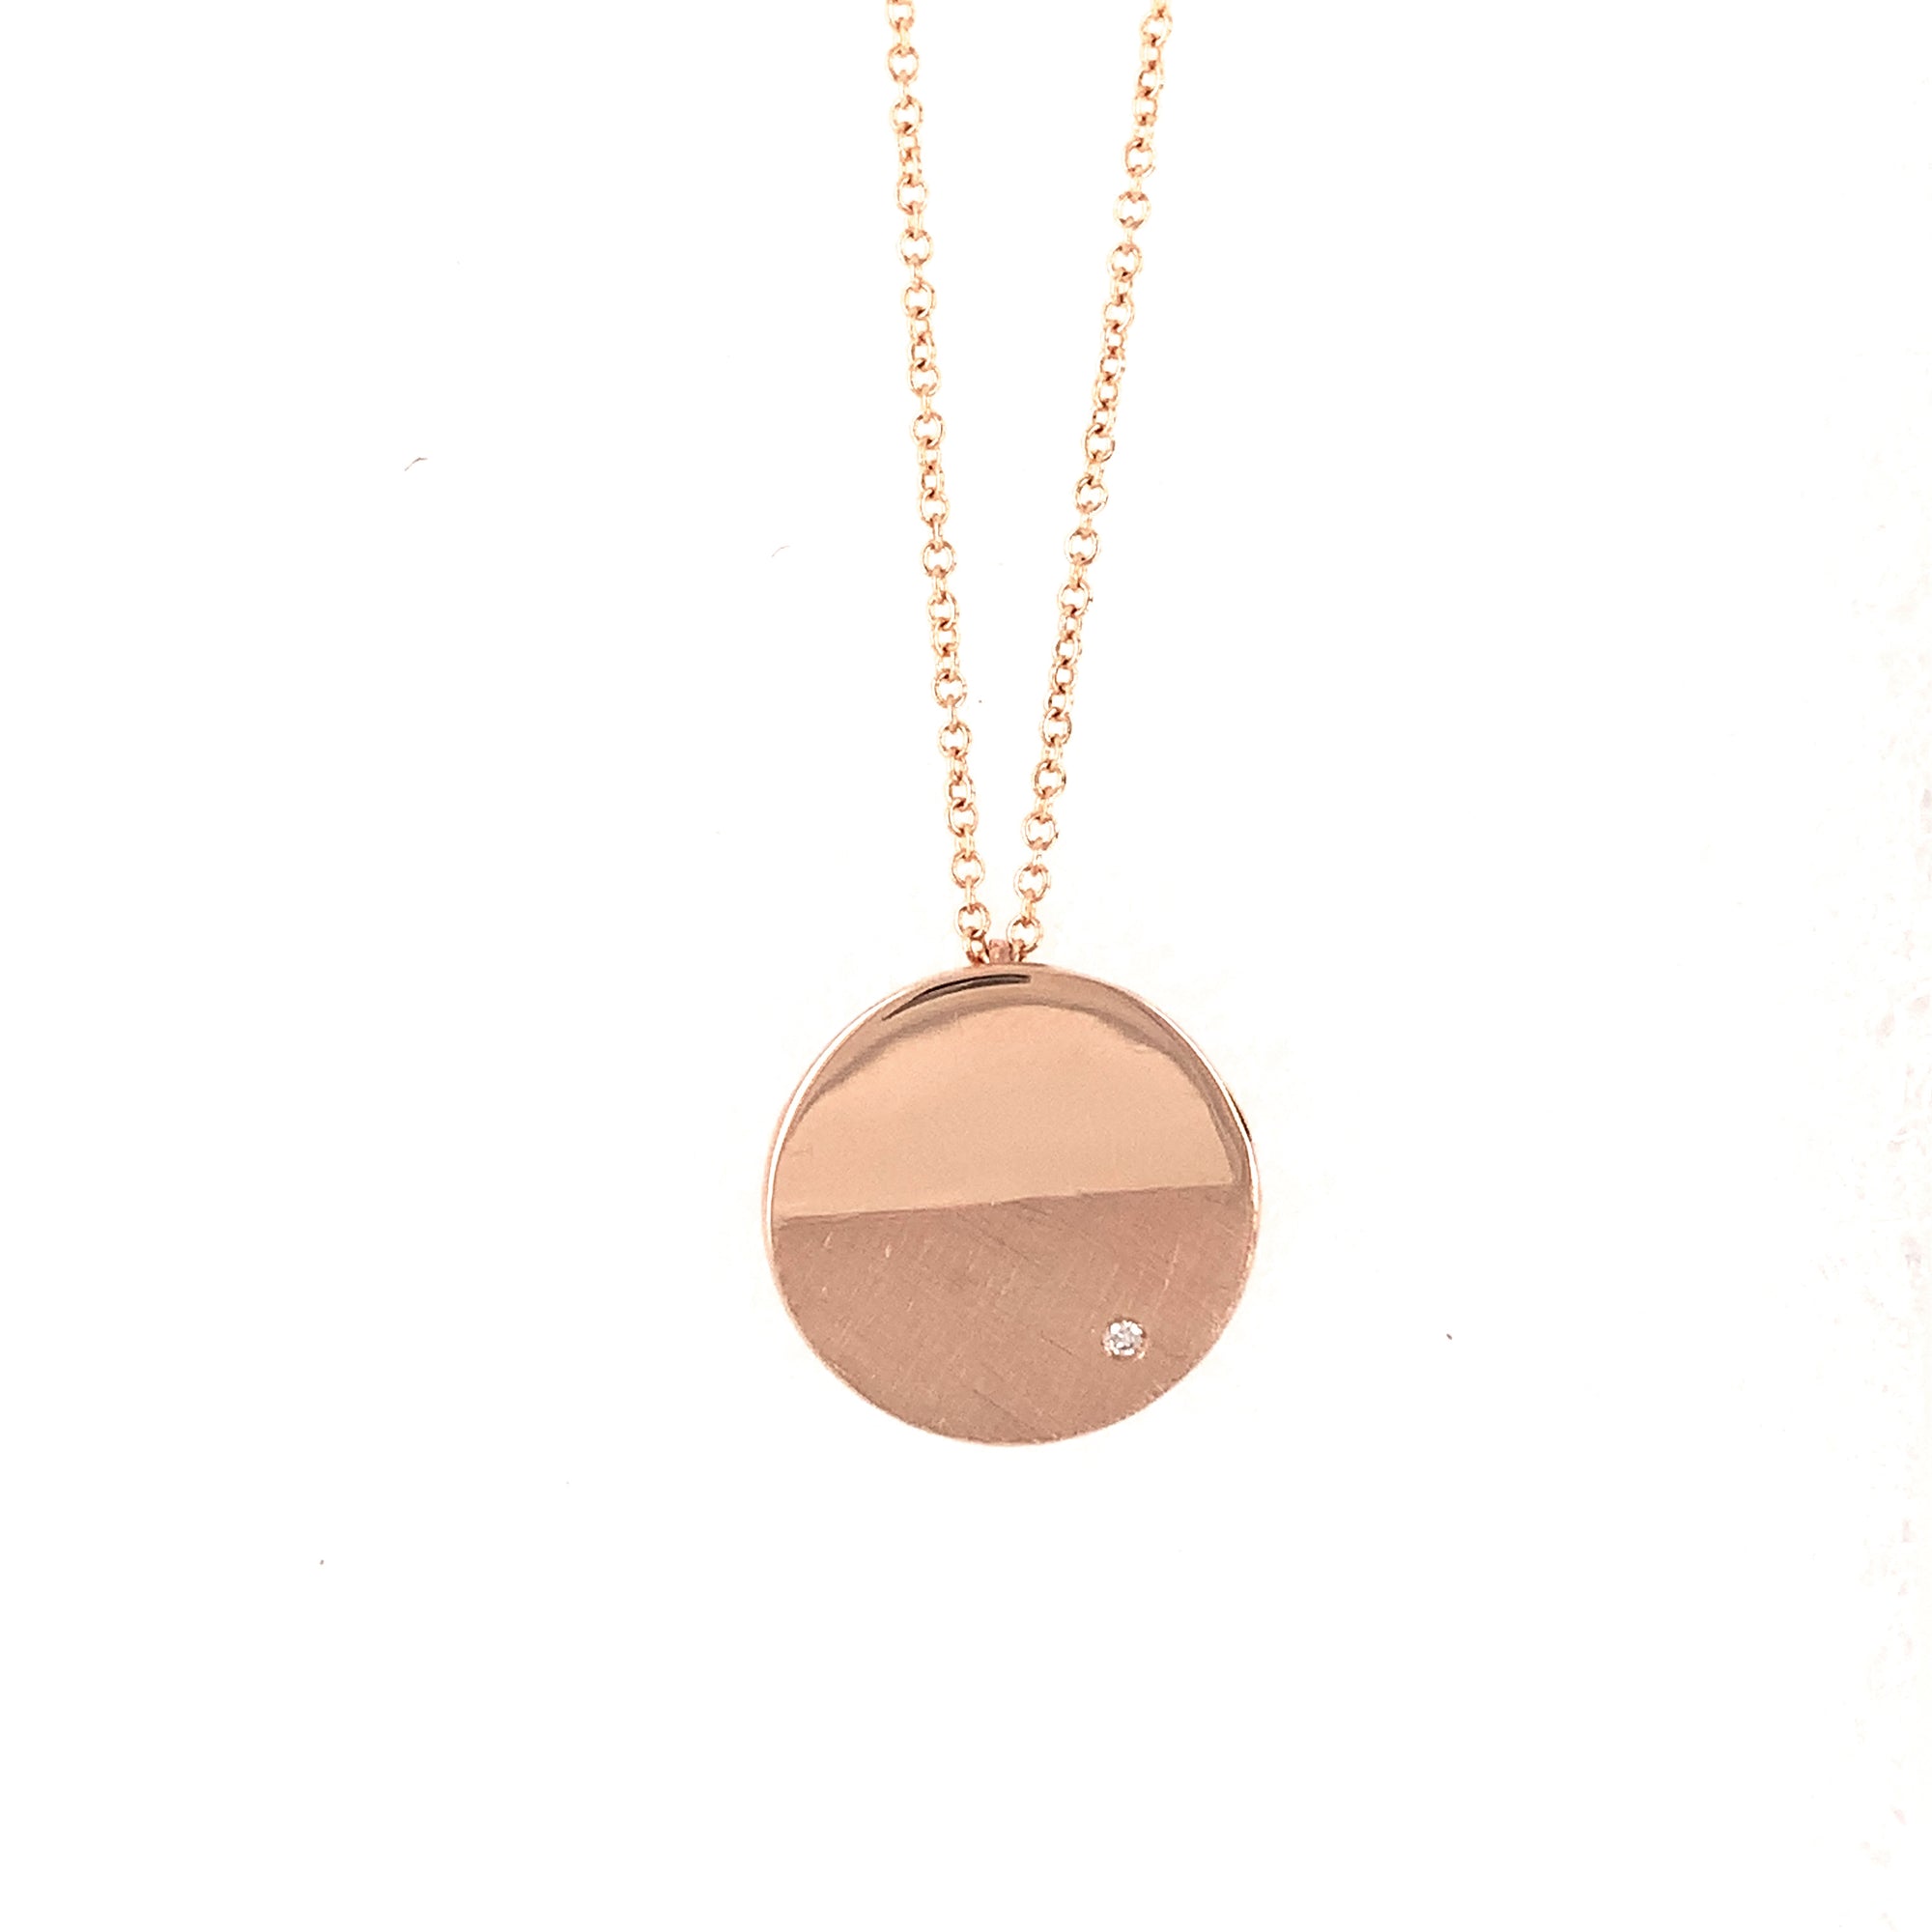 14k rose gold small circle pendant with complimenting satin and shiny finish and a single white diamond on a 1.0mm rolo link chain